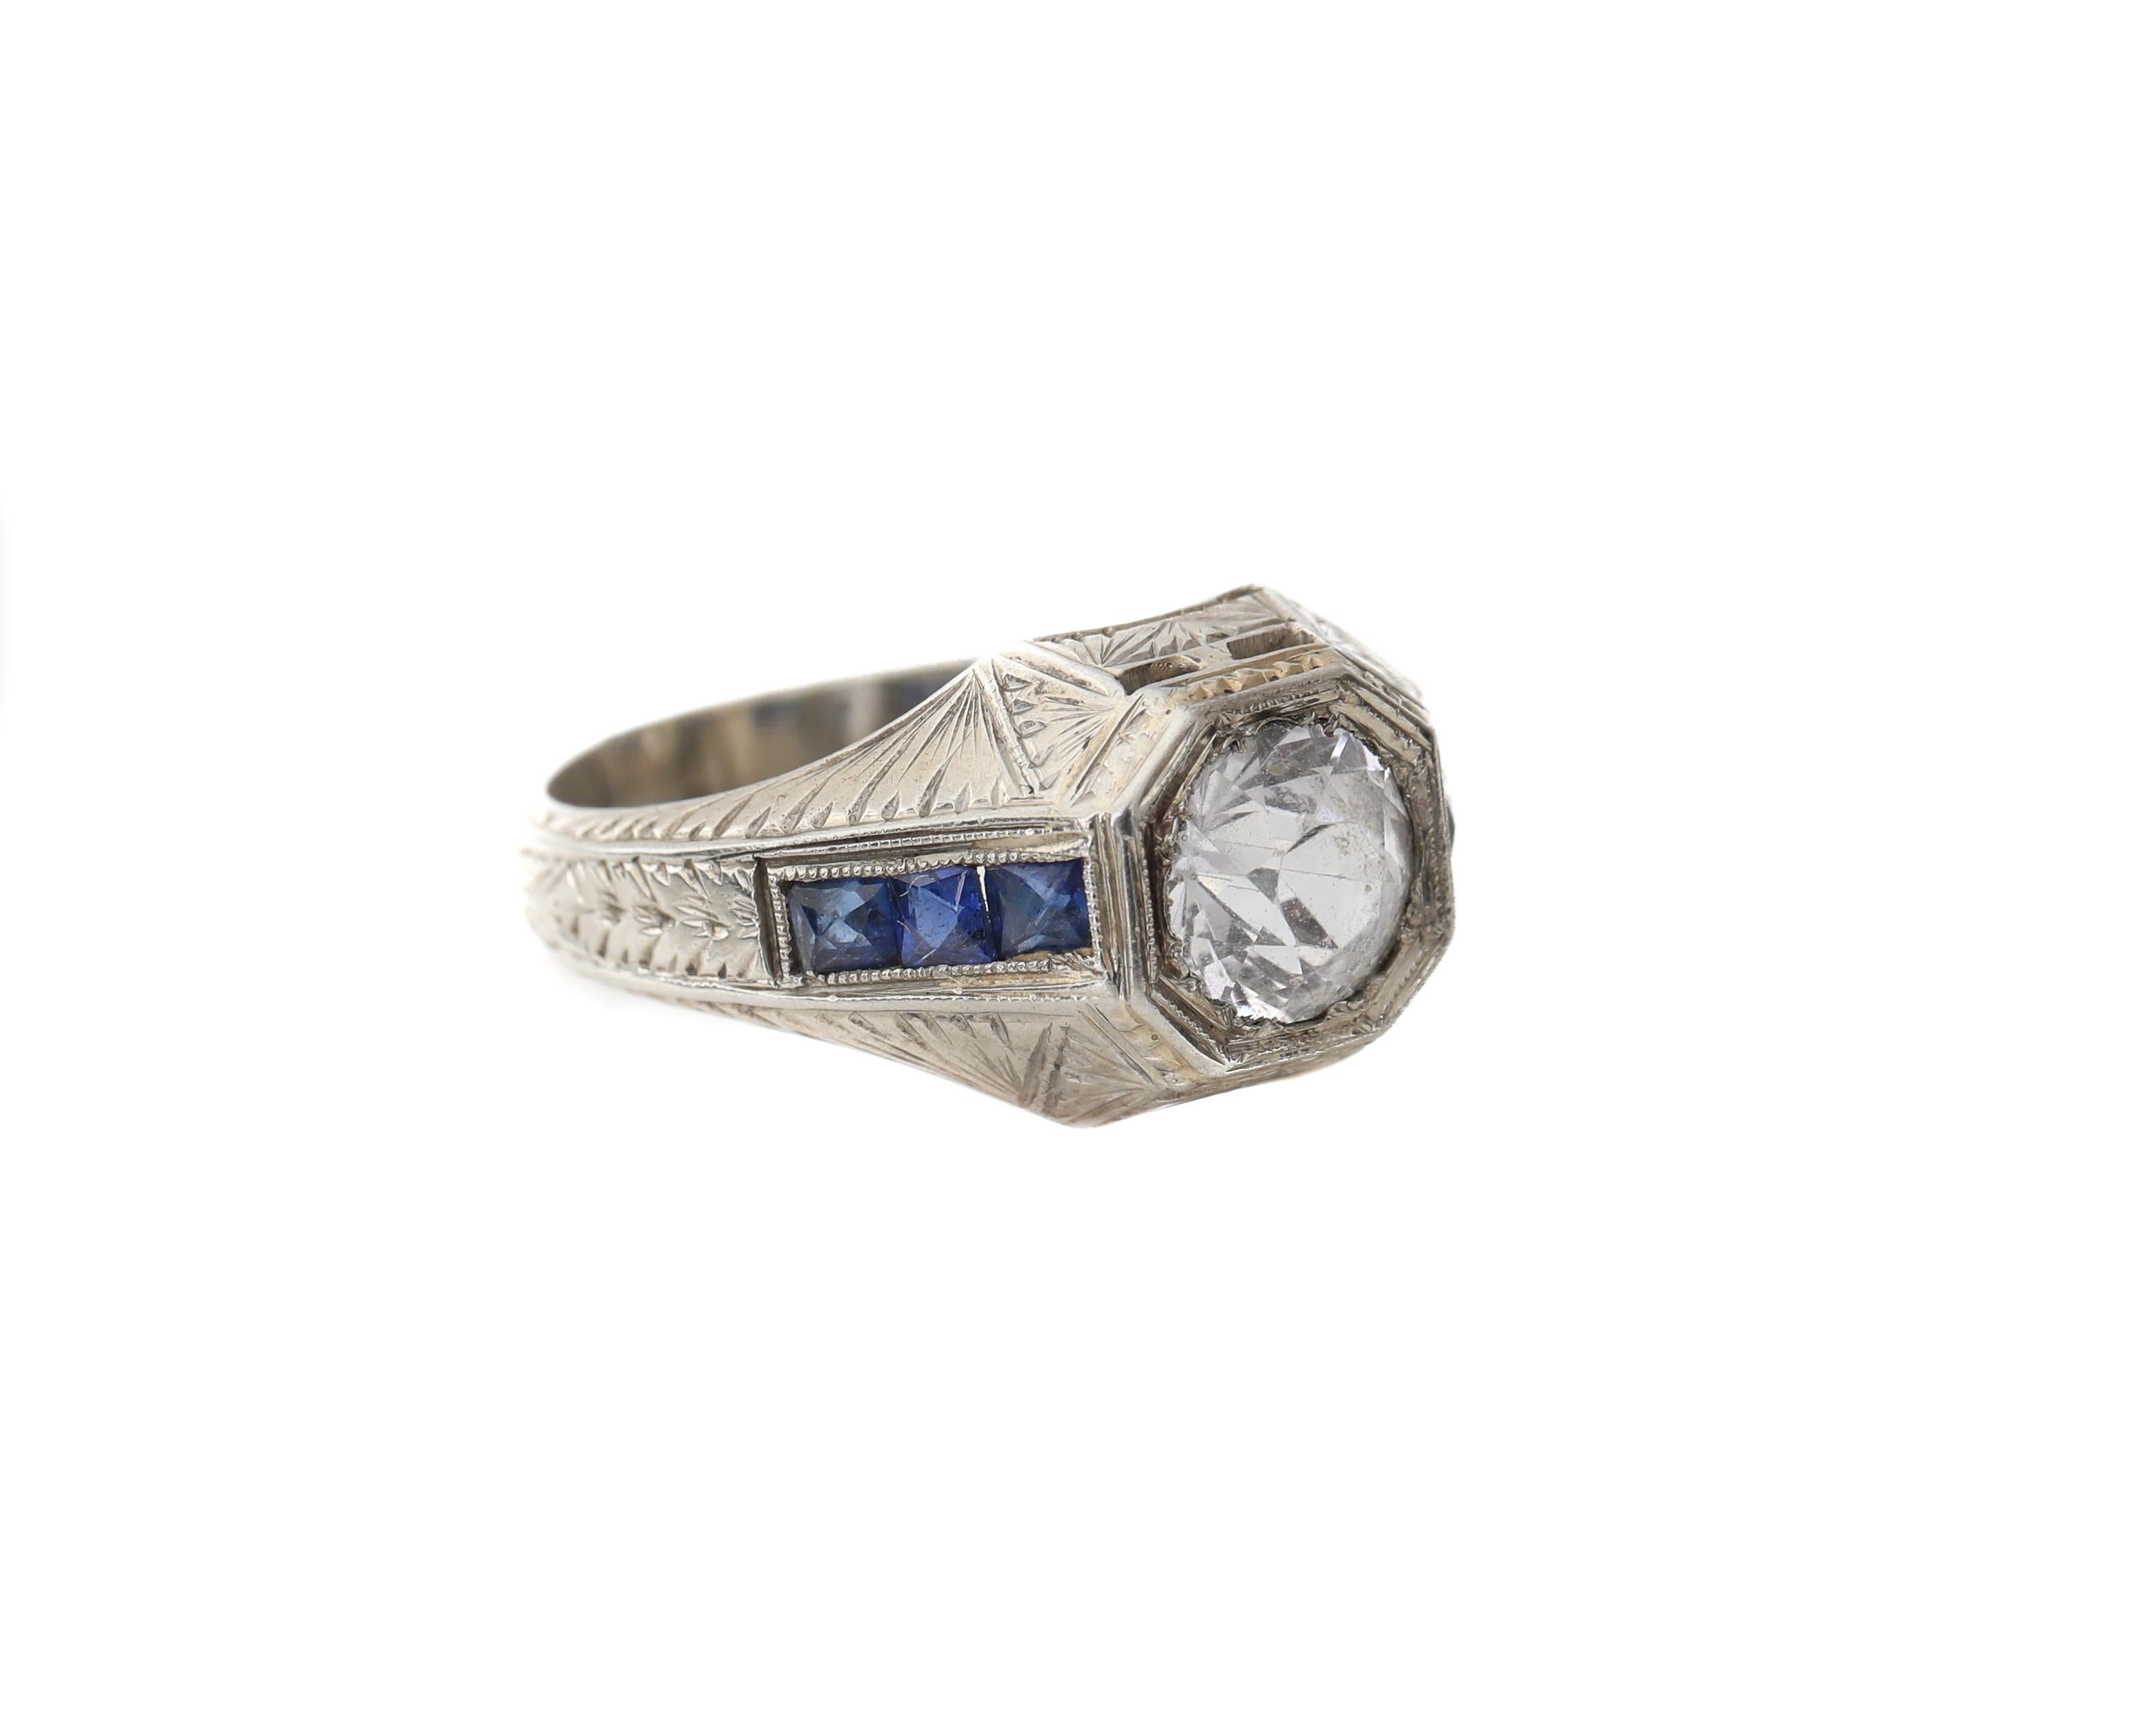 Here we have a very unique offering! Genuine 1930's Art Deco style men's ring with old european cut white sapphire center in a highly engraved ring. The 18 karat white gold ring is decorated with an evenly spaced etched design throughout the band